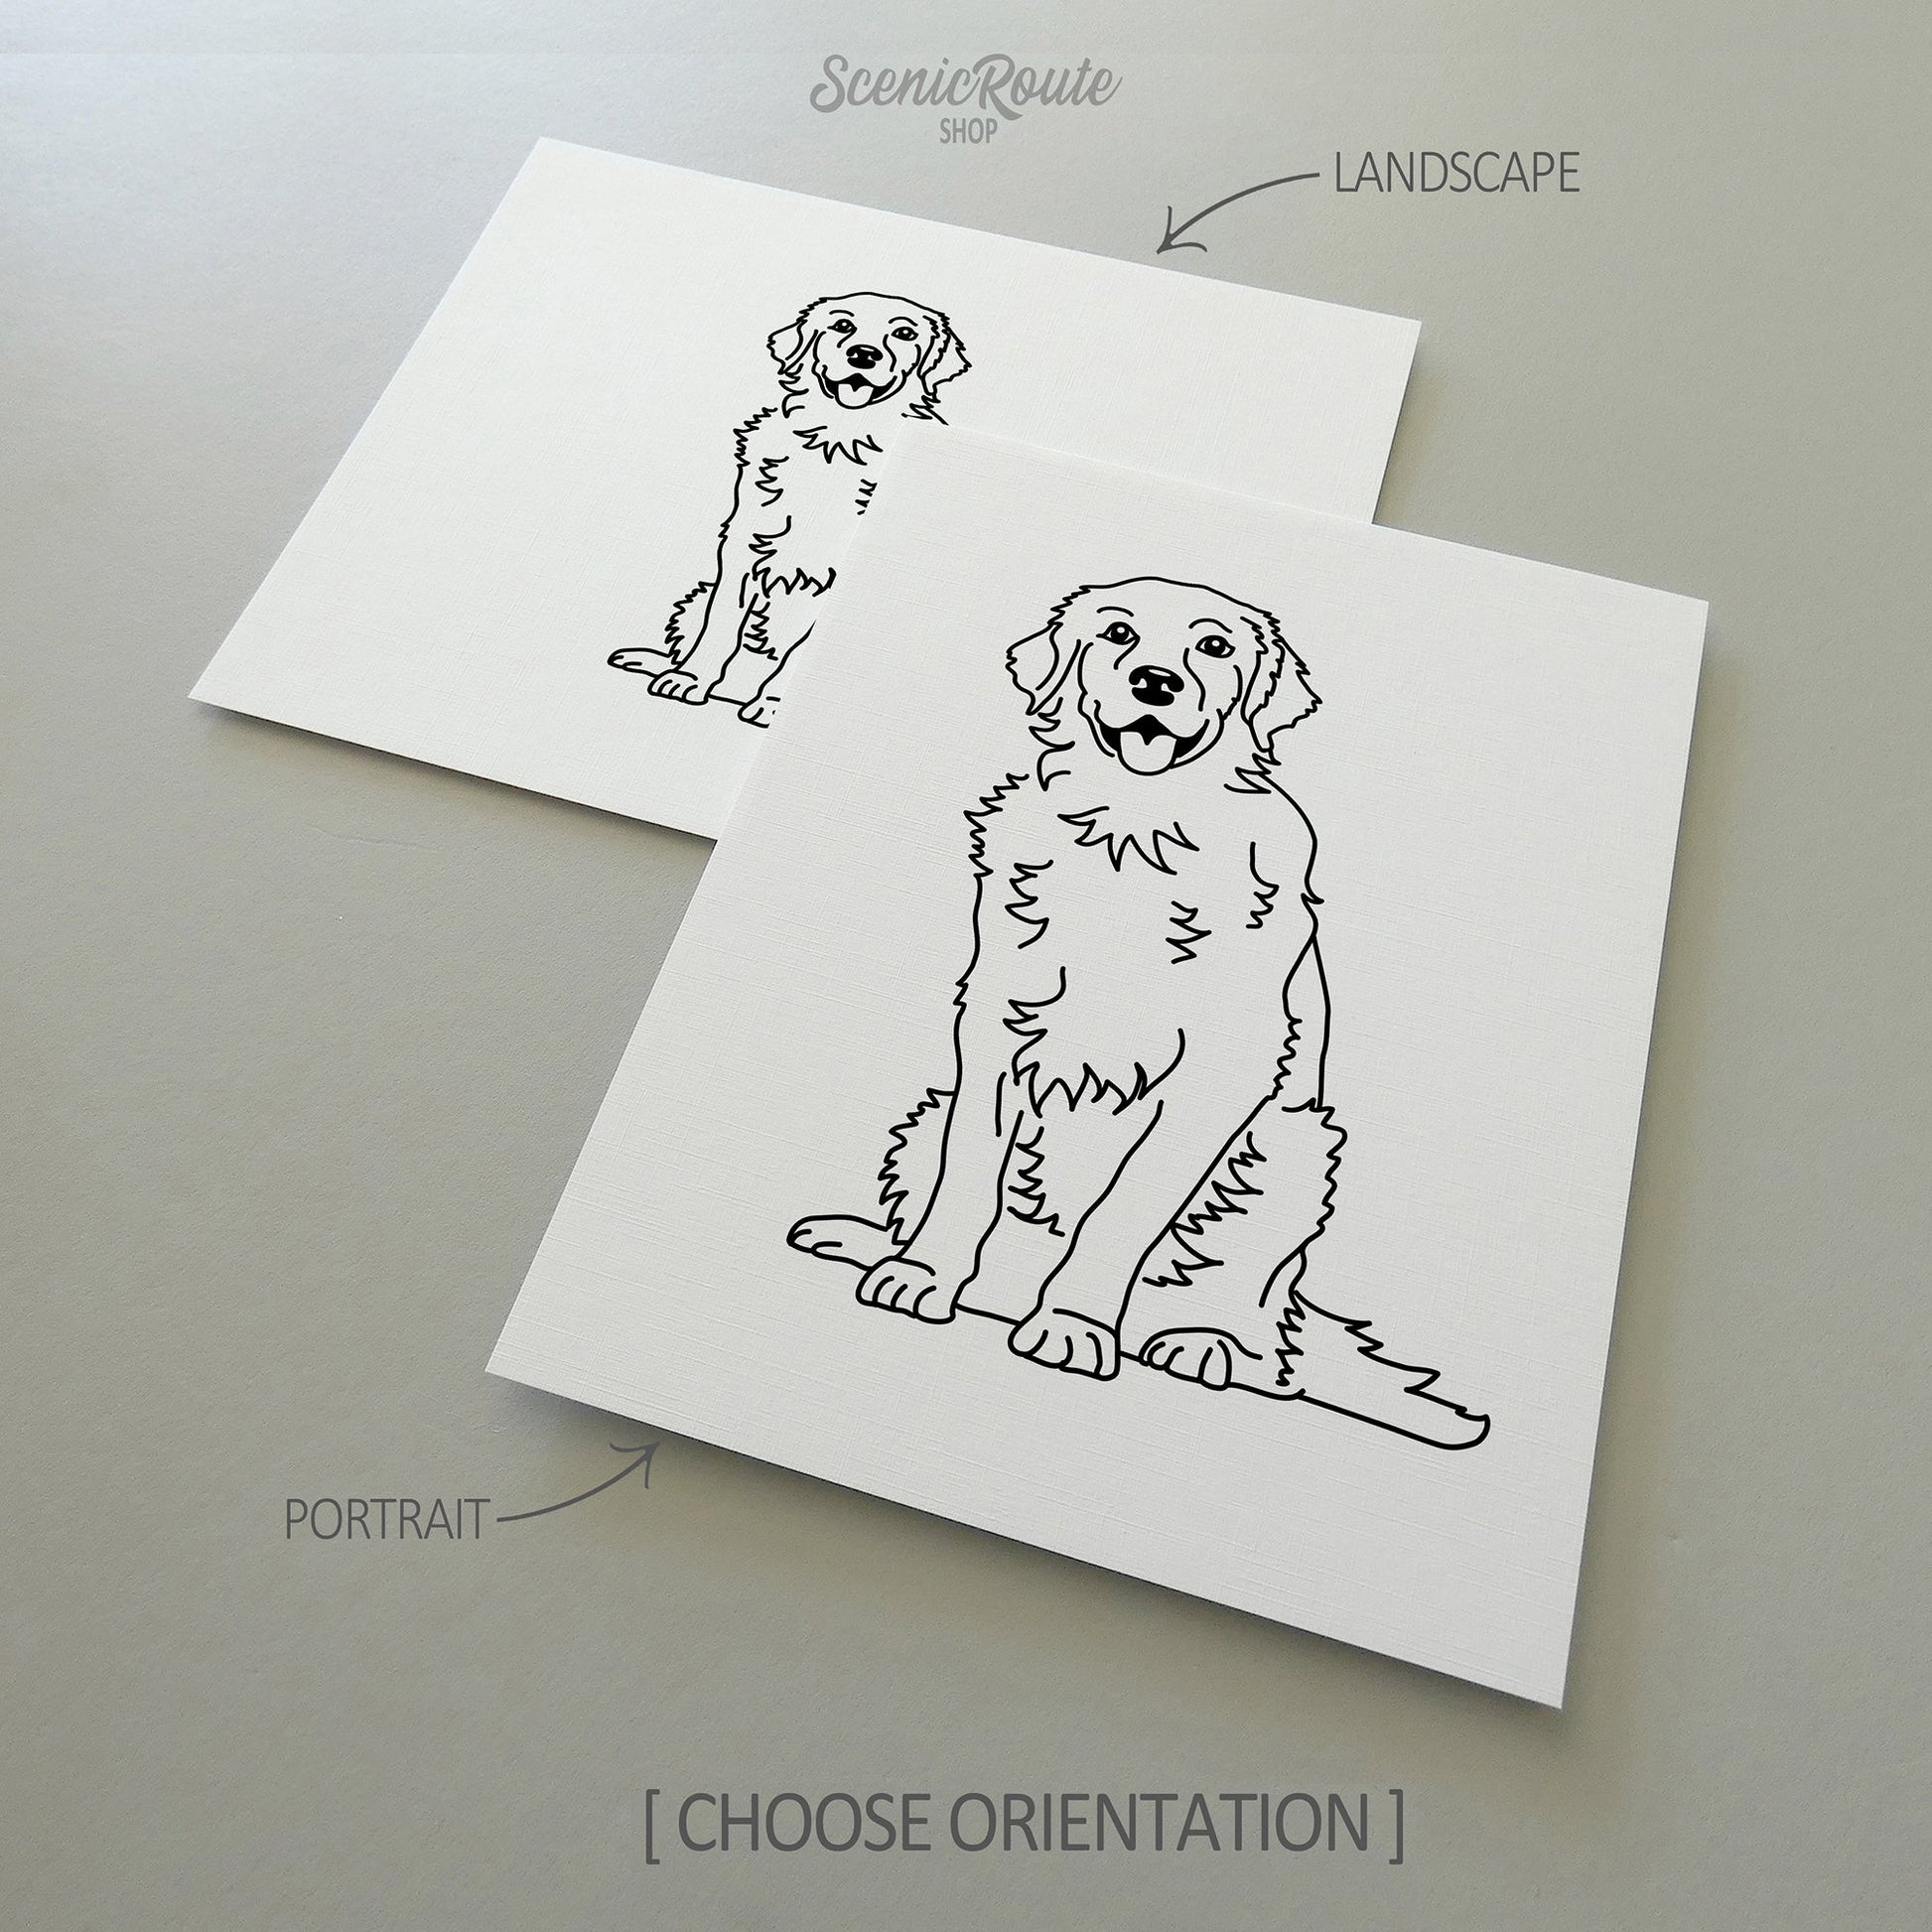 Two drawings of a Golden Retriever dog on white linen paper with a gray background.  Pieces are shown in portrait and landscape orientation options to illustrate the available art print options.